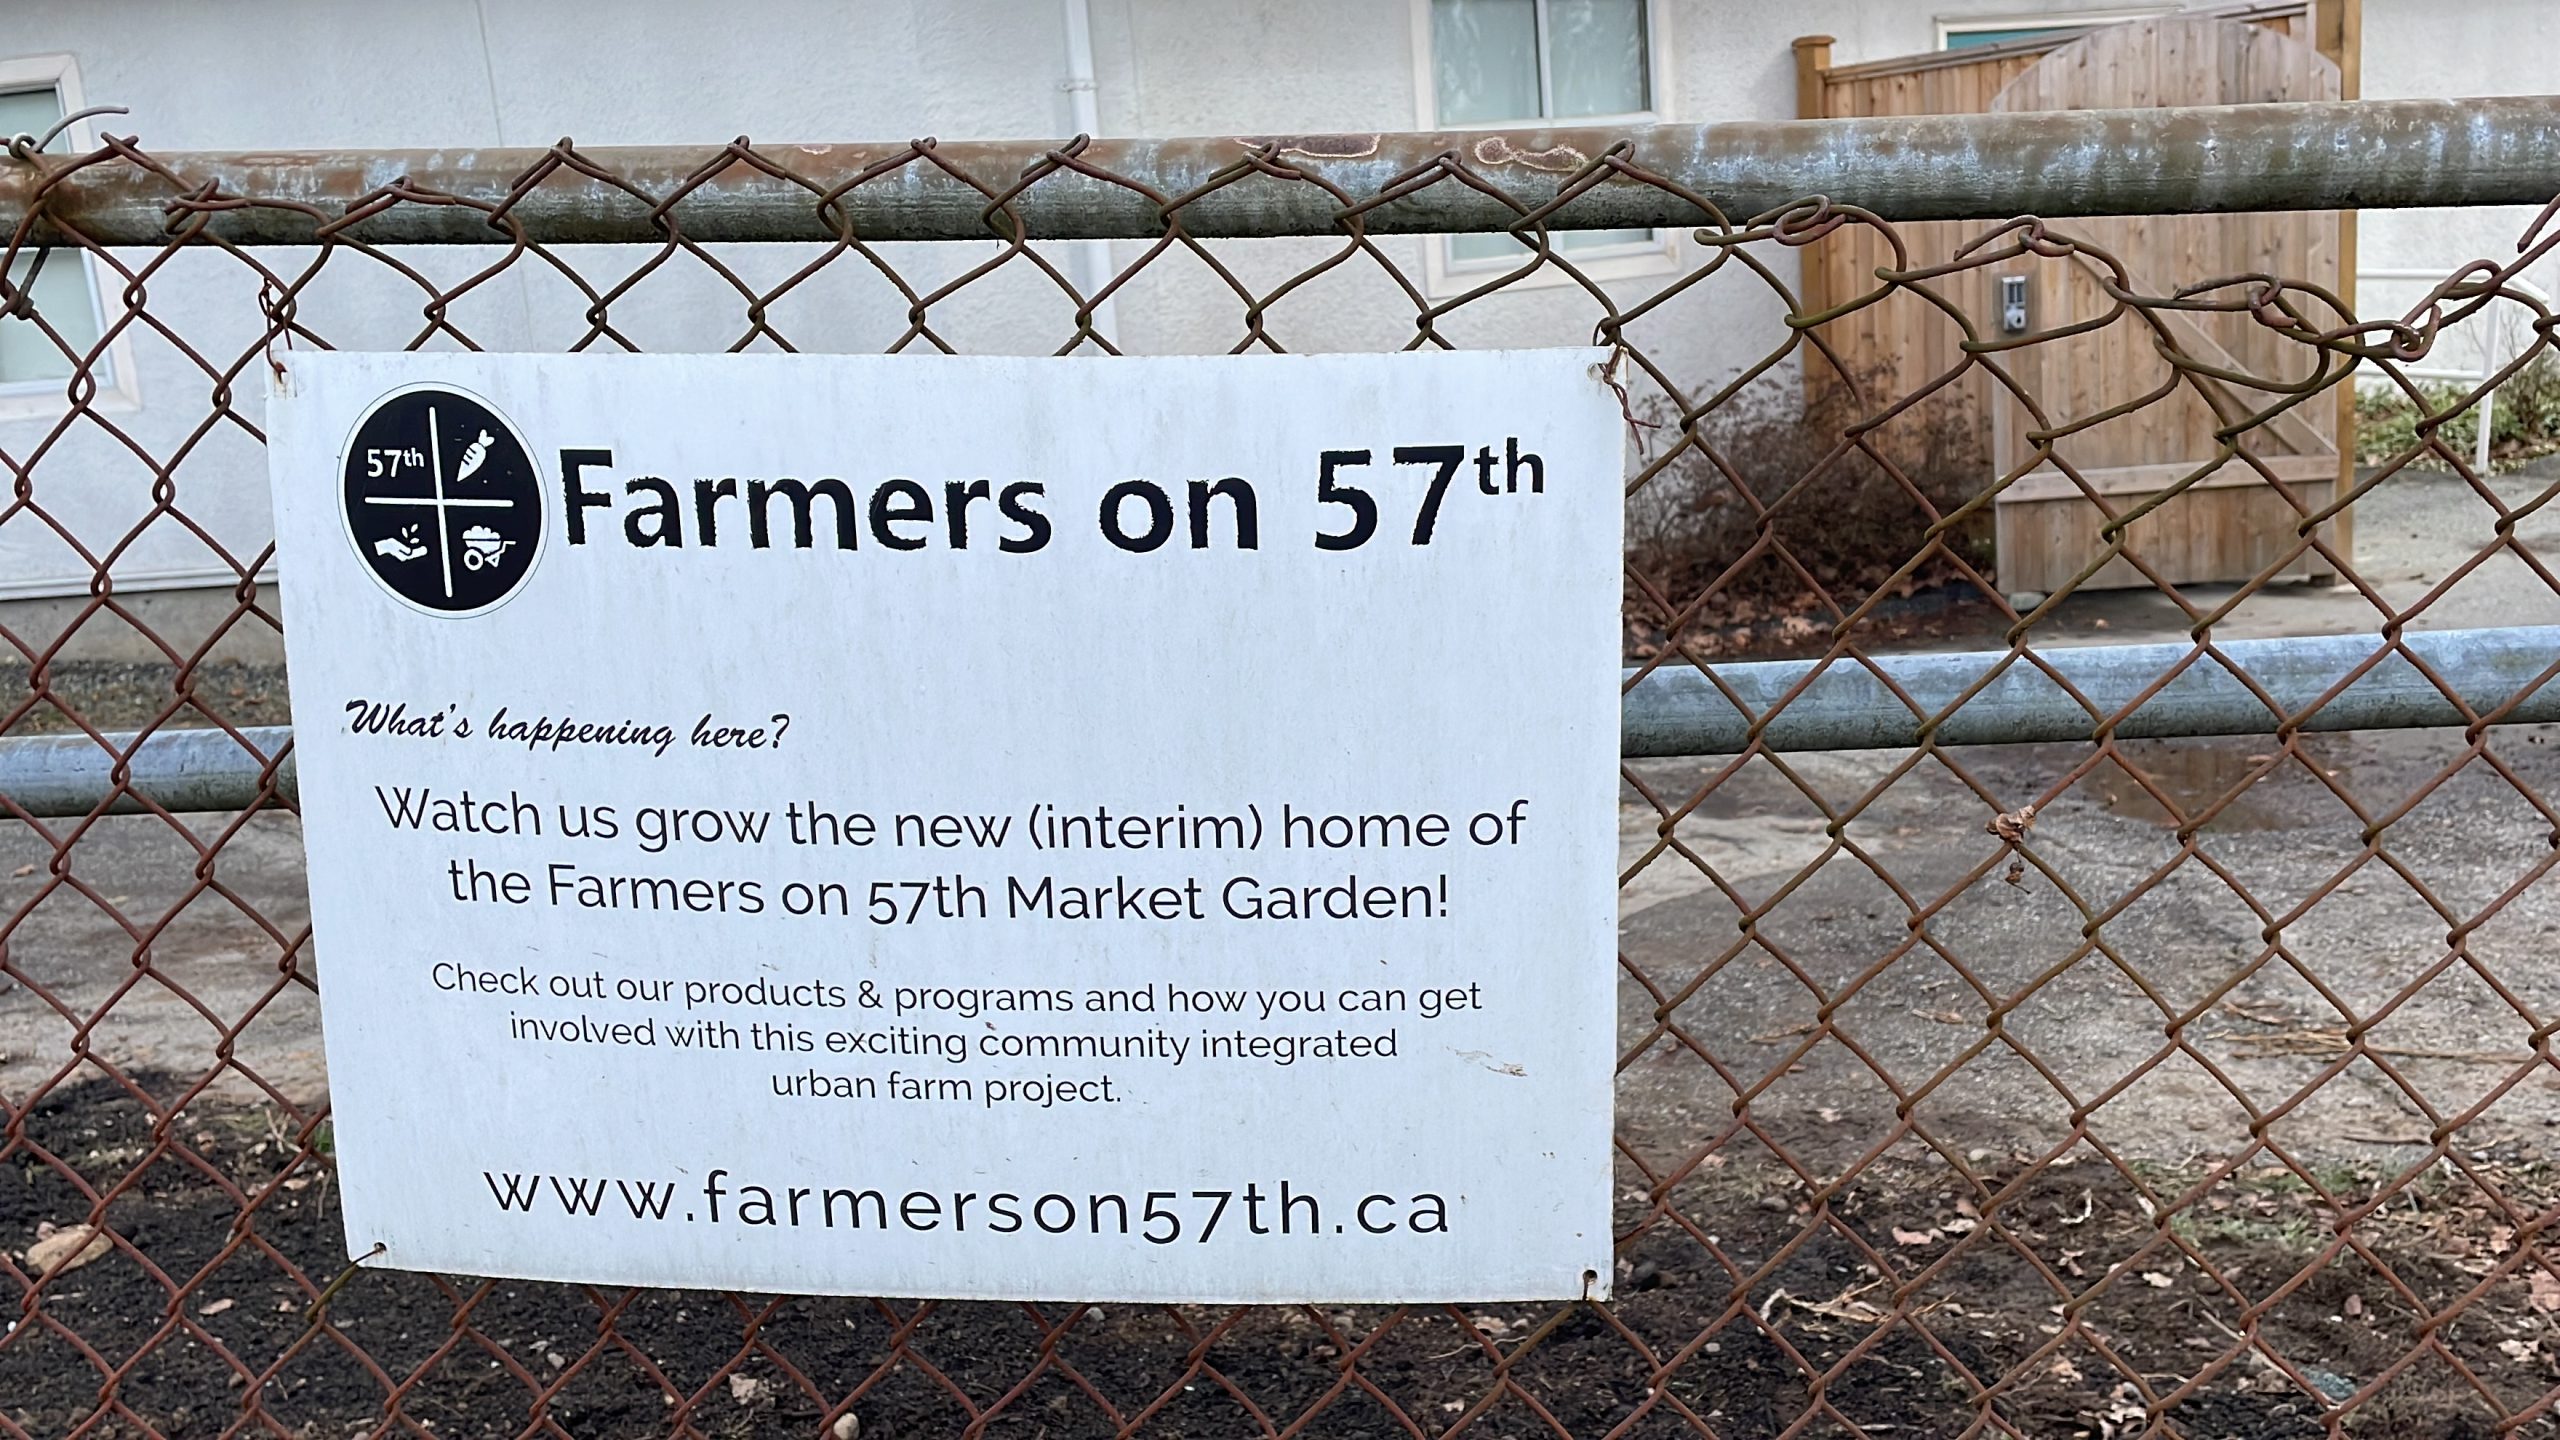 A Farmers on 57th sign is shown.